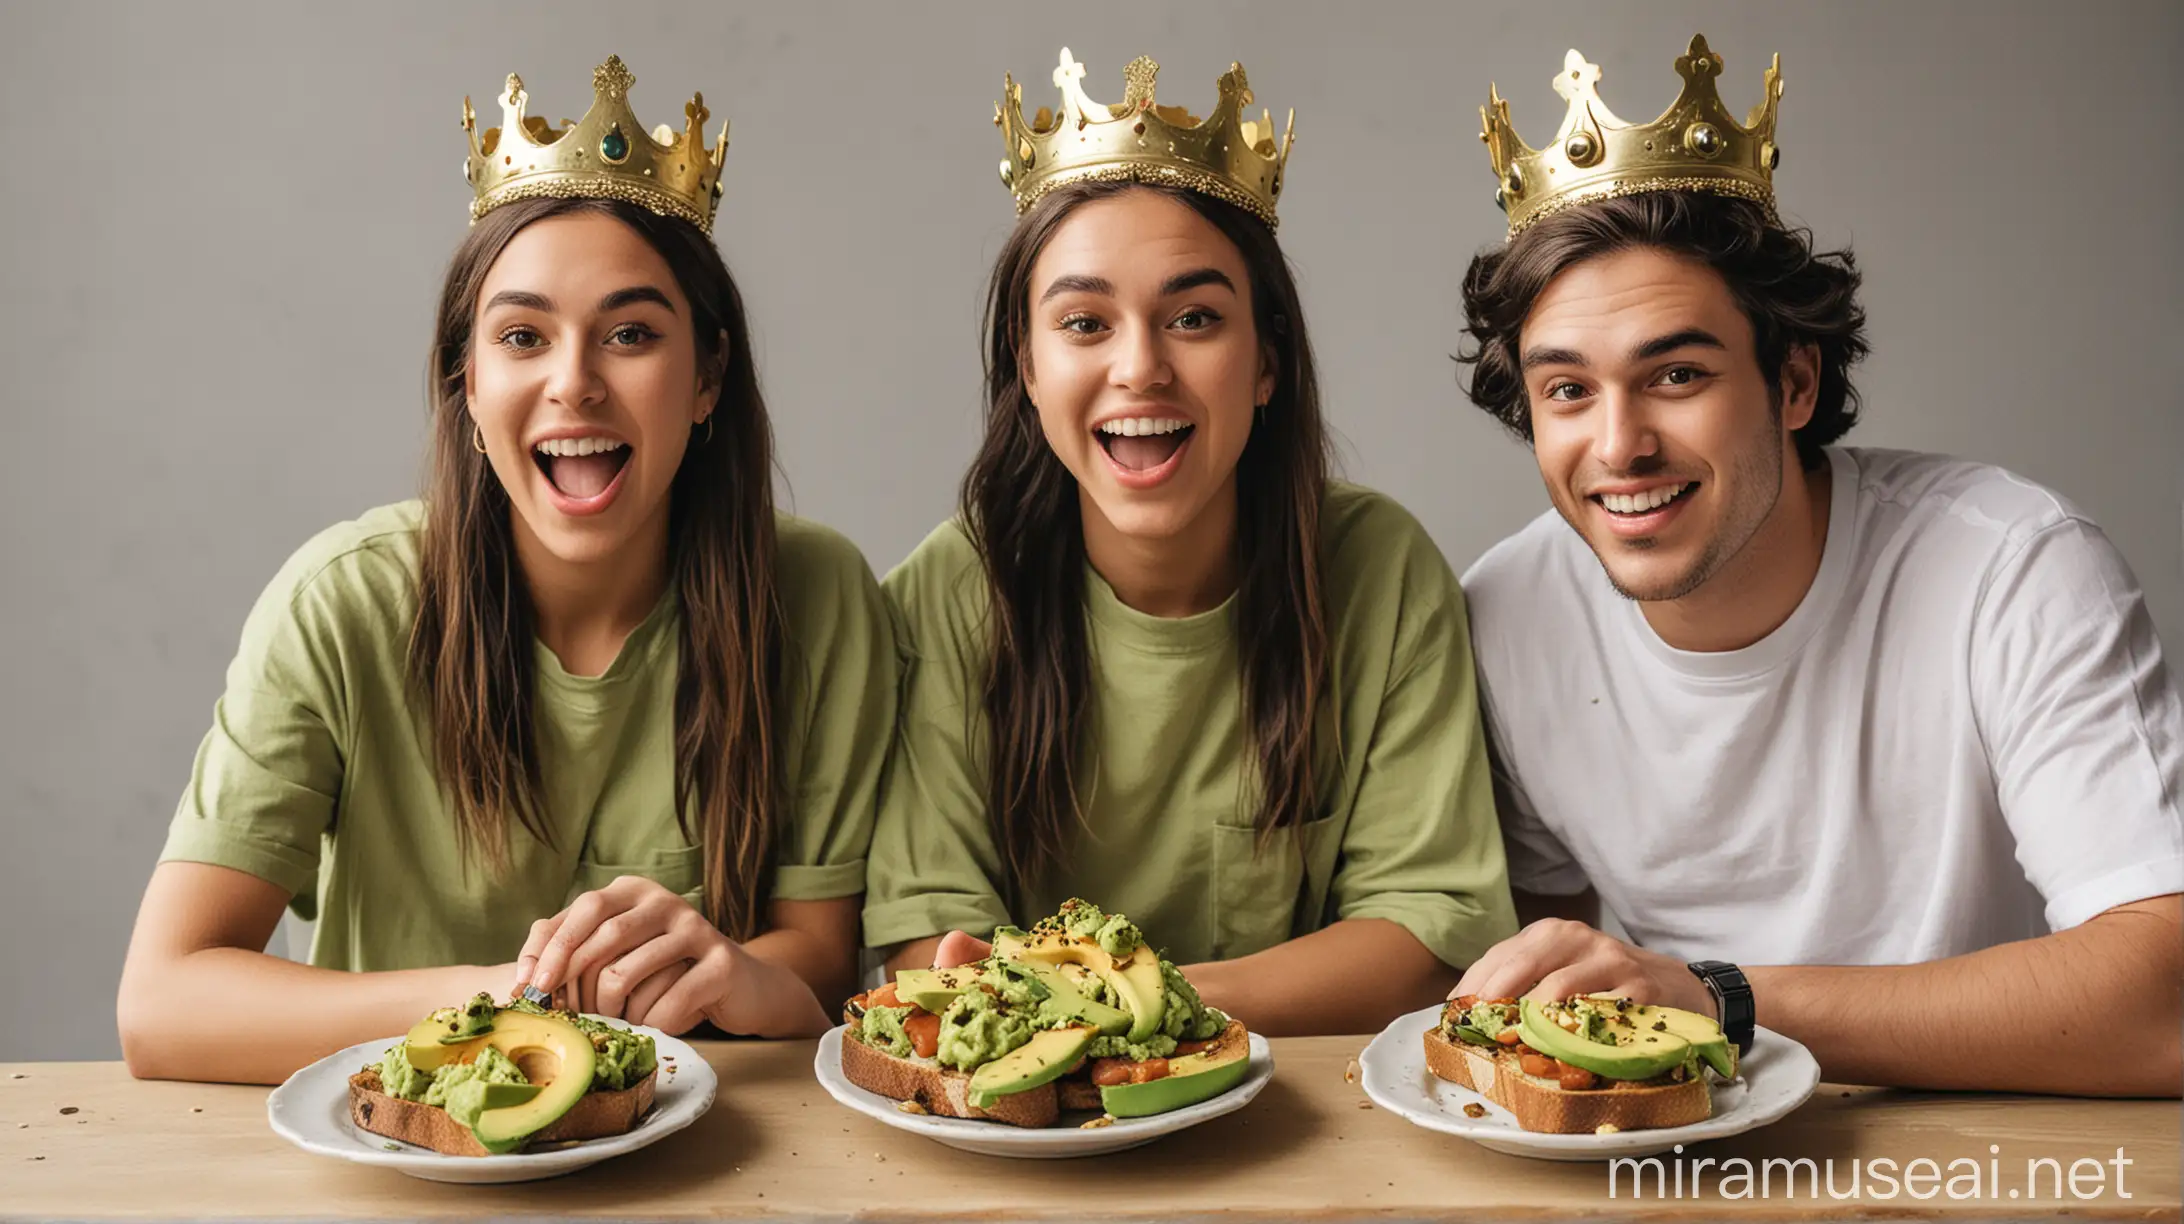 Millennial King and Queen Enjoying Avocado Toast with Crowned Royalty